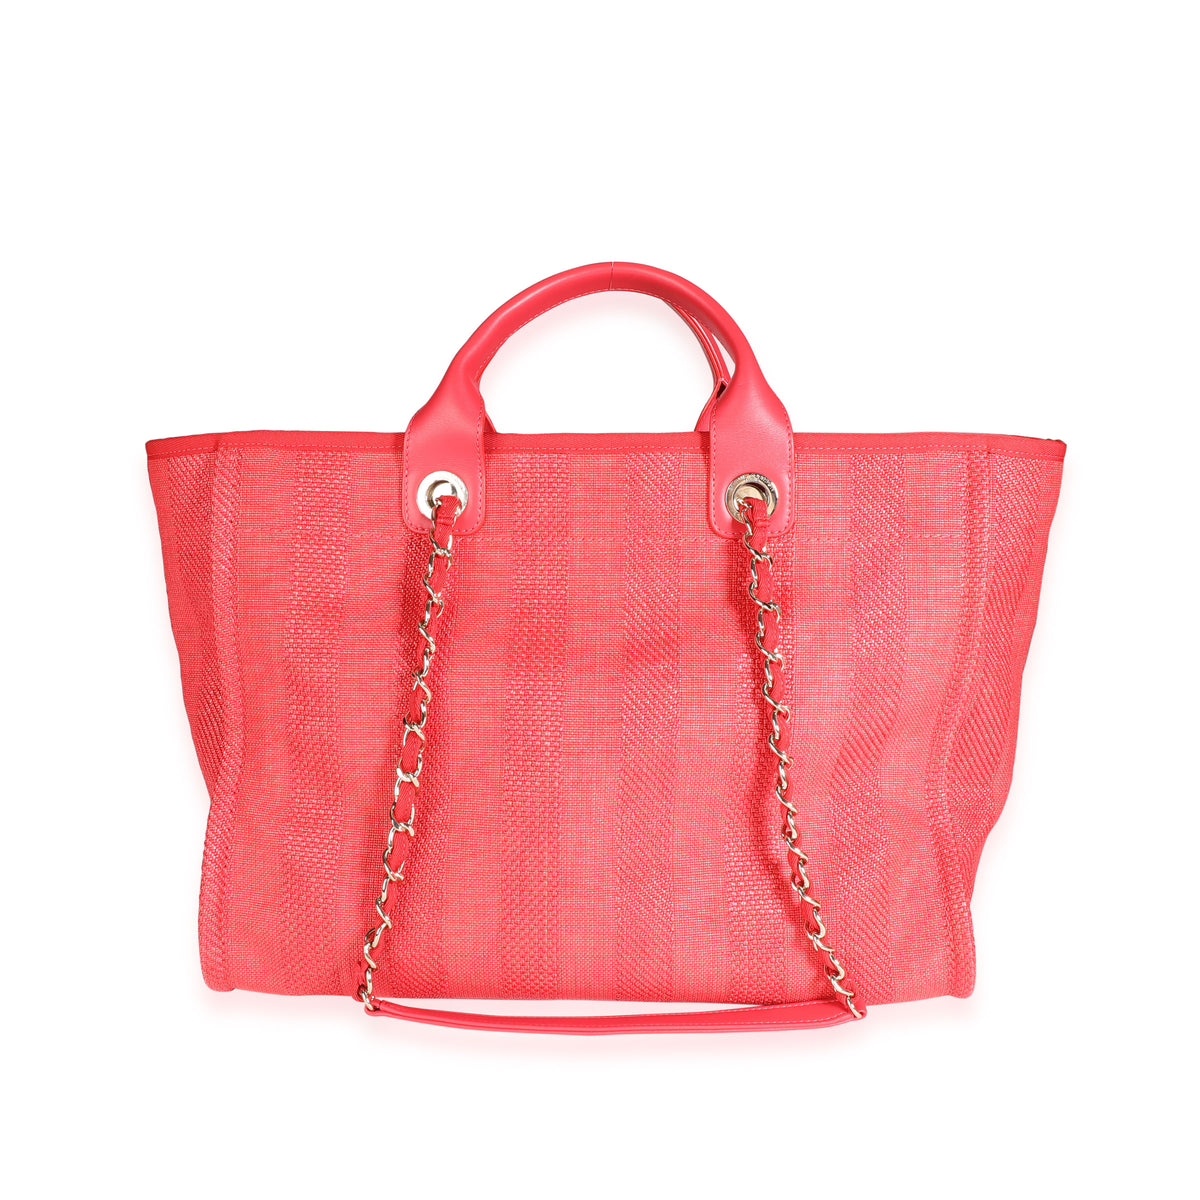 Chanel Red Canvas & Leather Large Deauville Tote, myGemma, DE